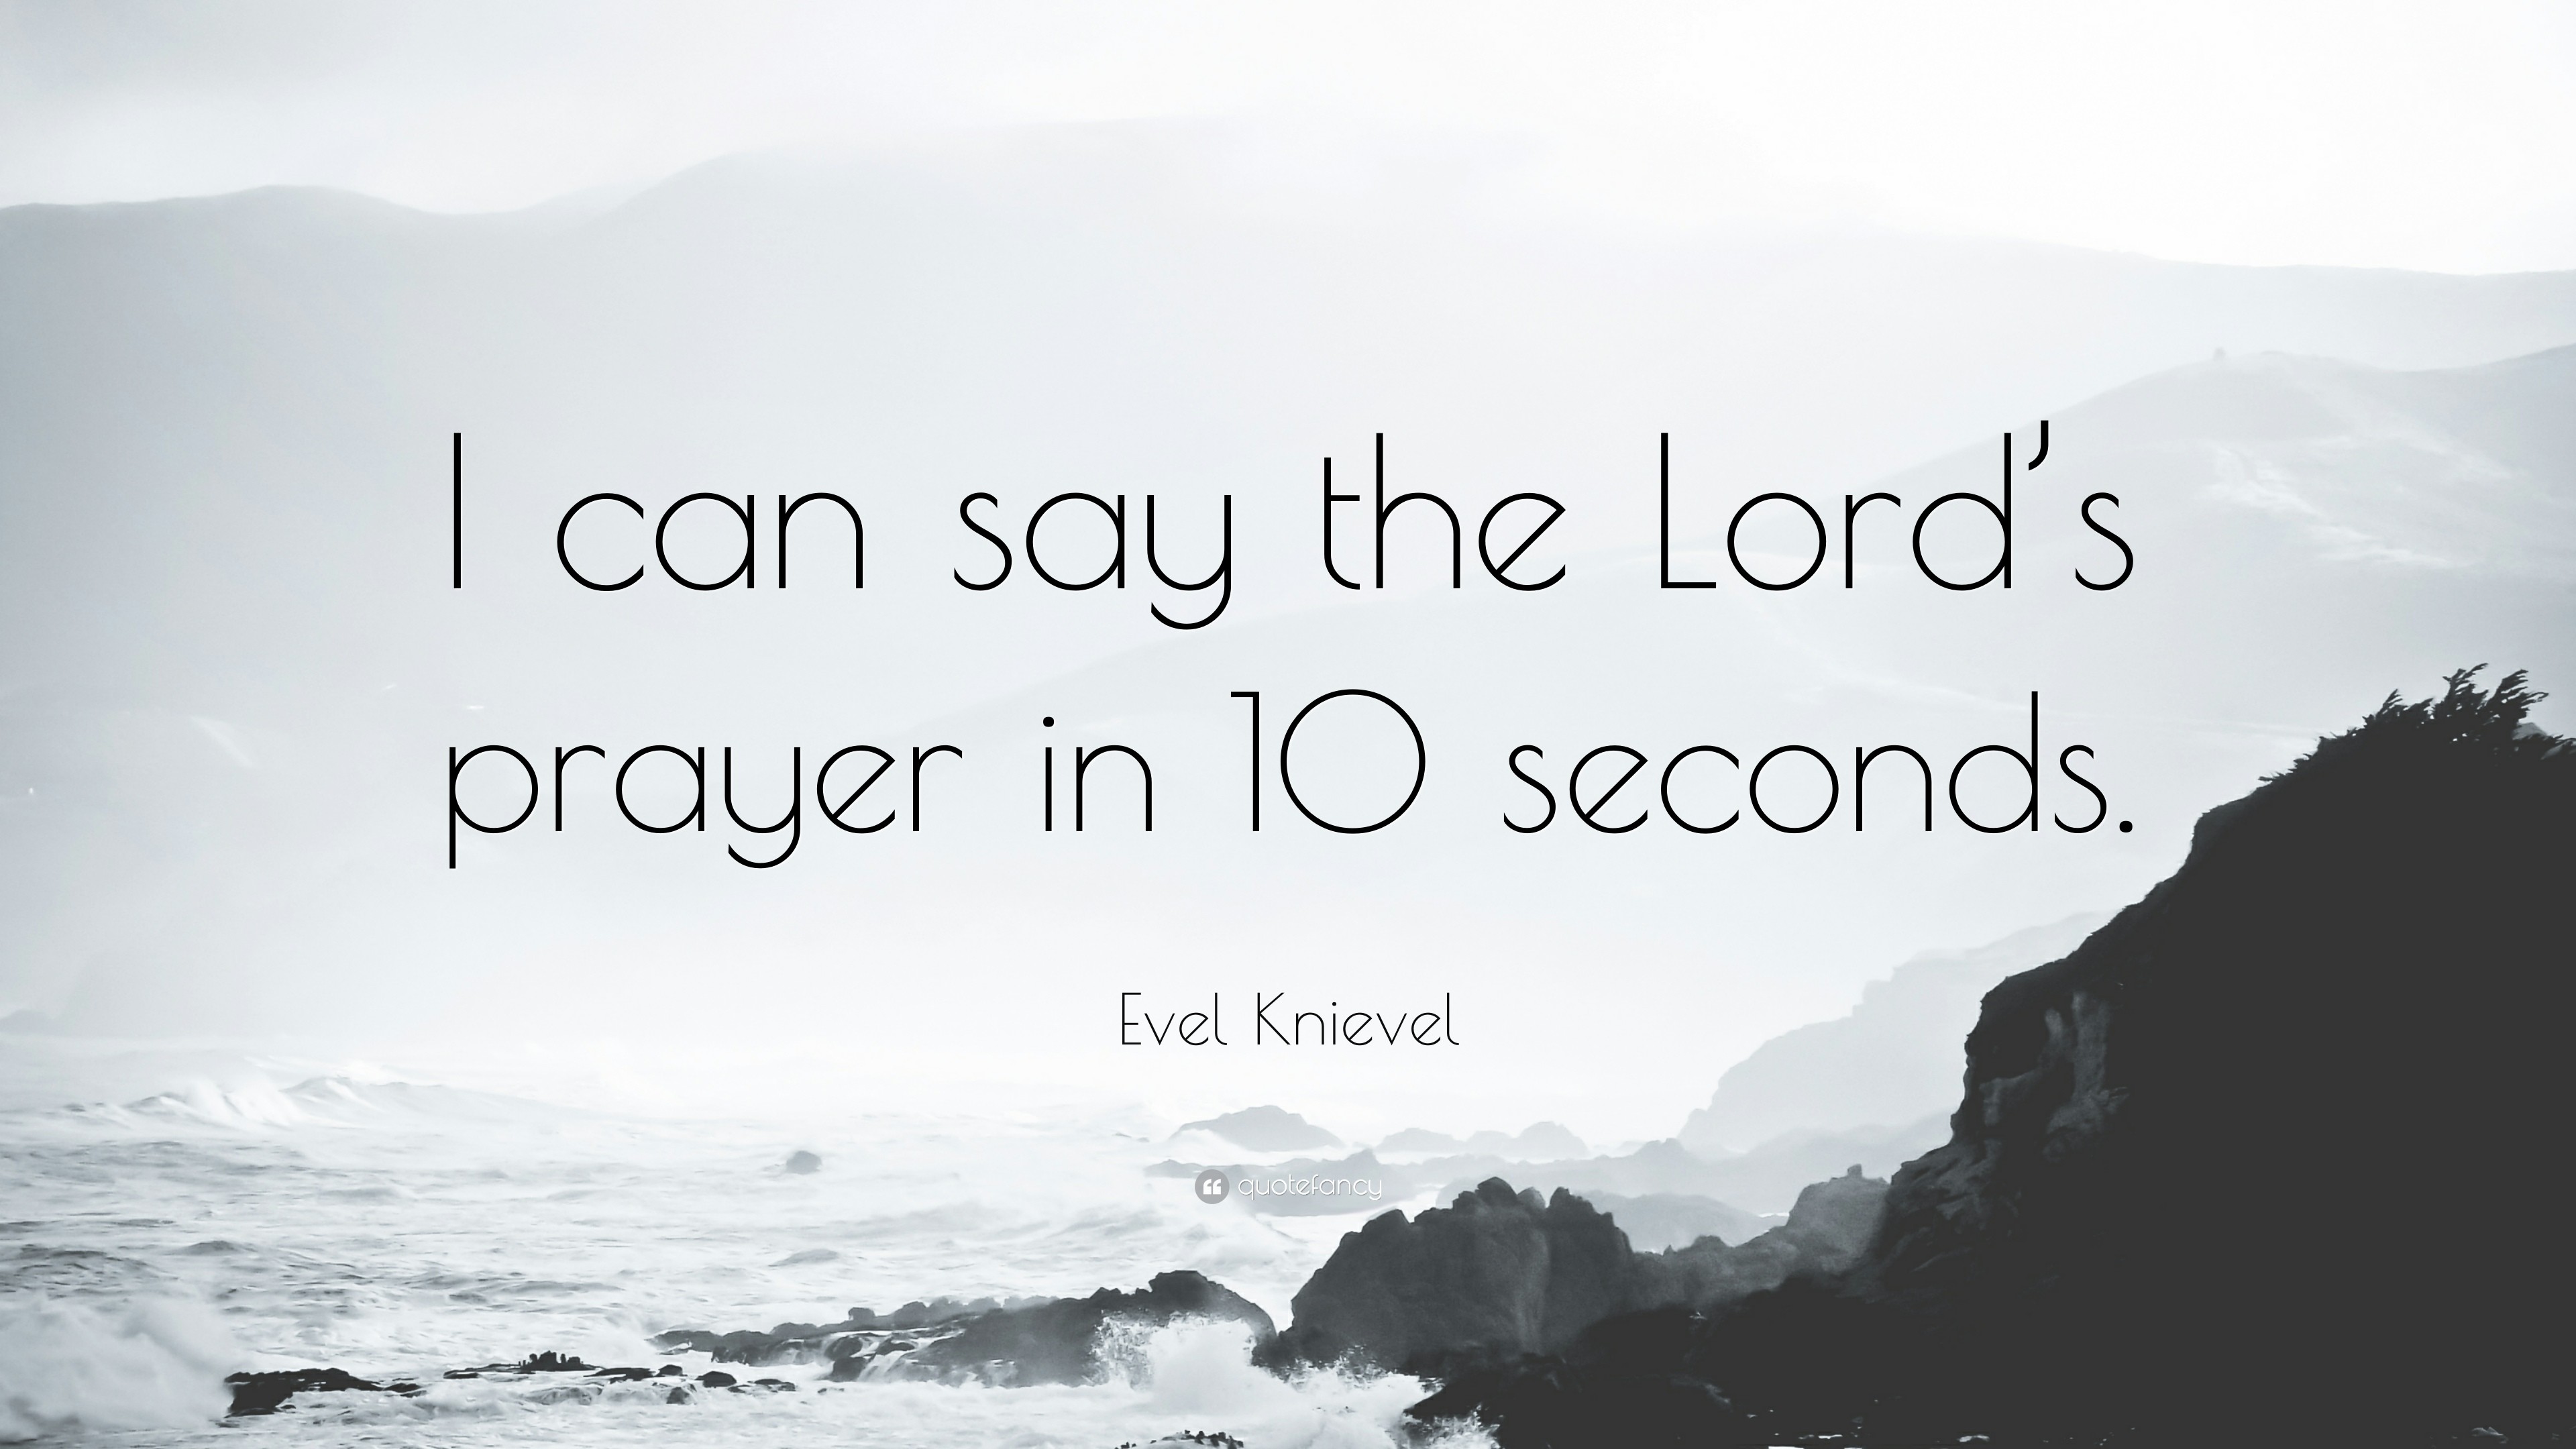 3840x2160 Evel Knievel Quote: “I can say the Lord's prayer in 10 seconds.”